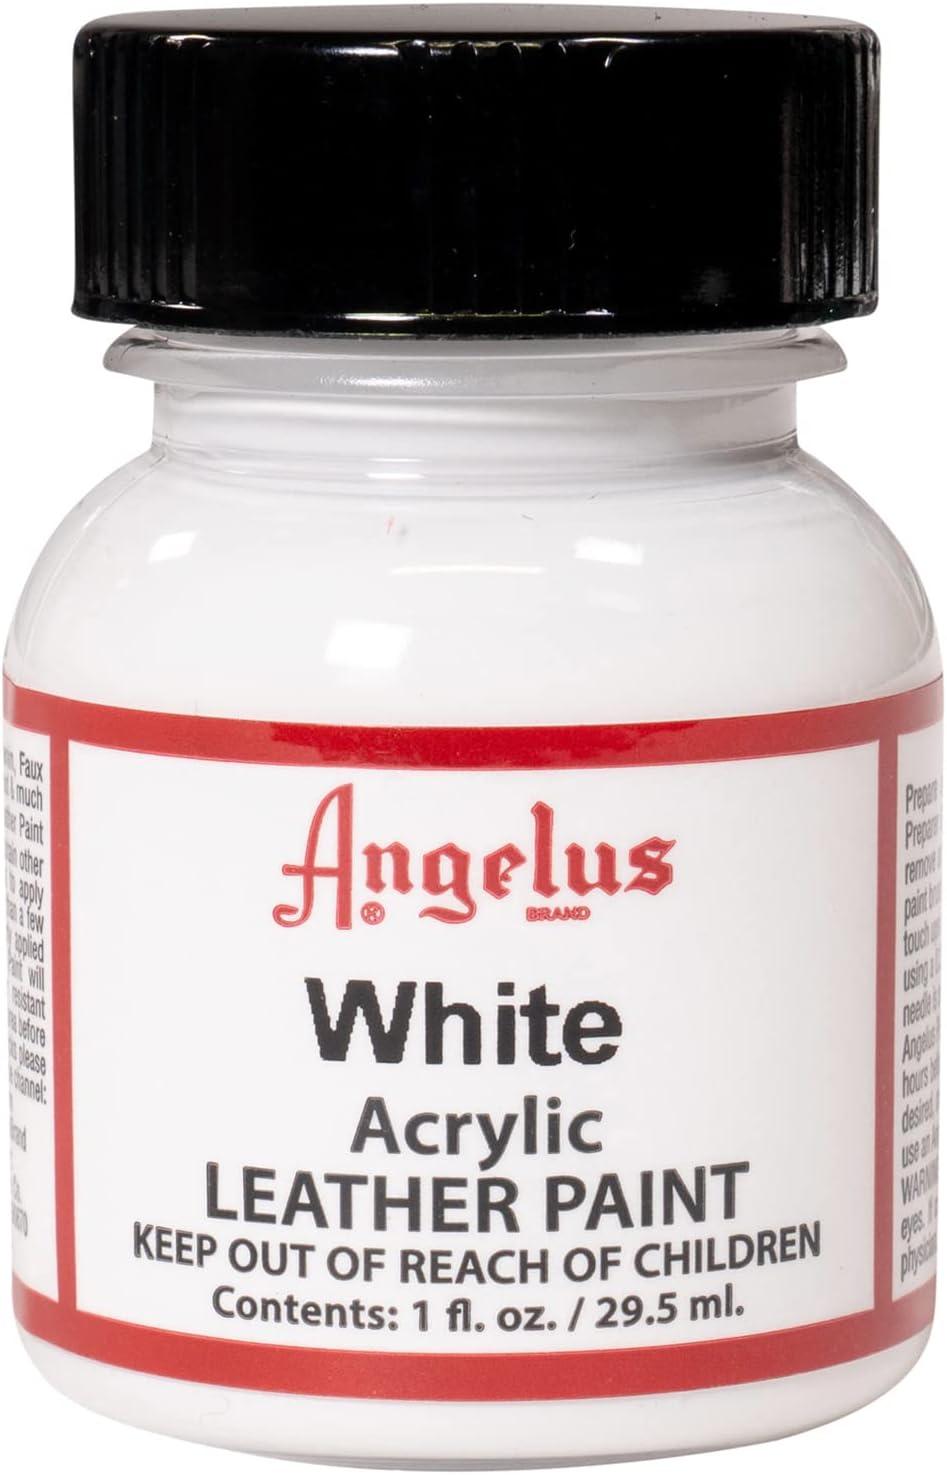 ANGELUS BRAND ACRYLIC LEATHER PAINT WATERPROOF VARIETY OF COLORS 1